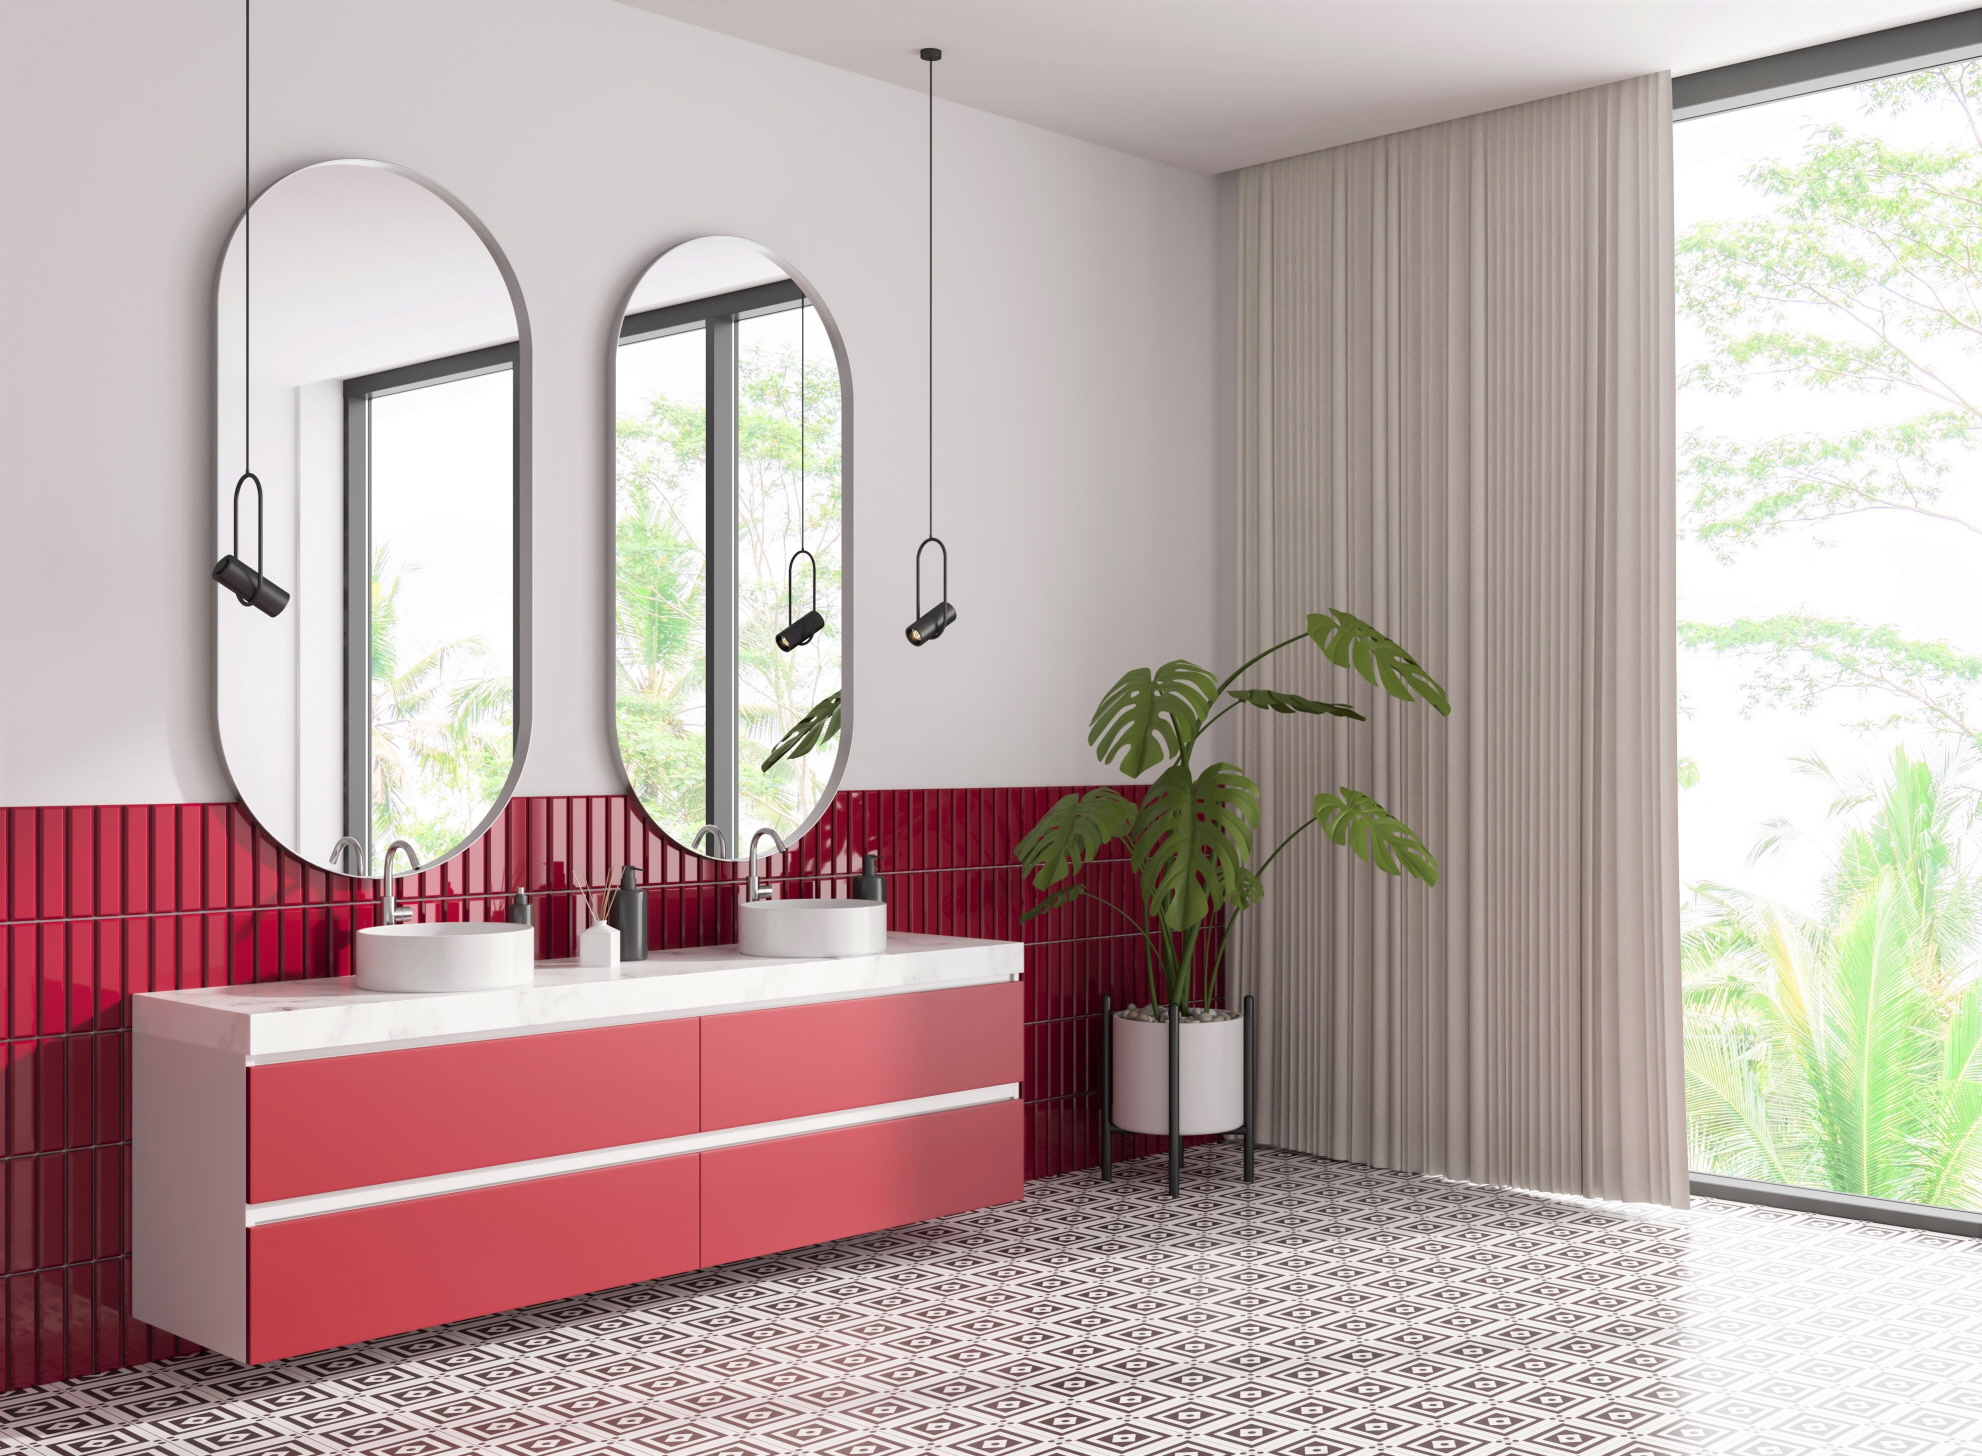 Rich Red adds boldness and warmth to the bathroom, creating a sleek, vibrant, and intimate ambiance.